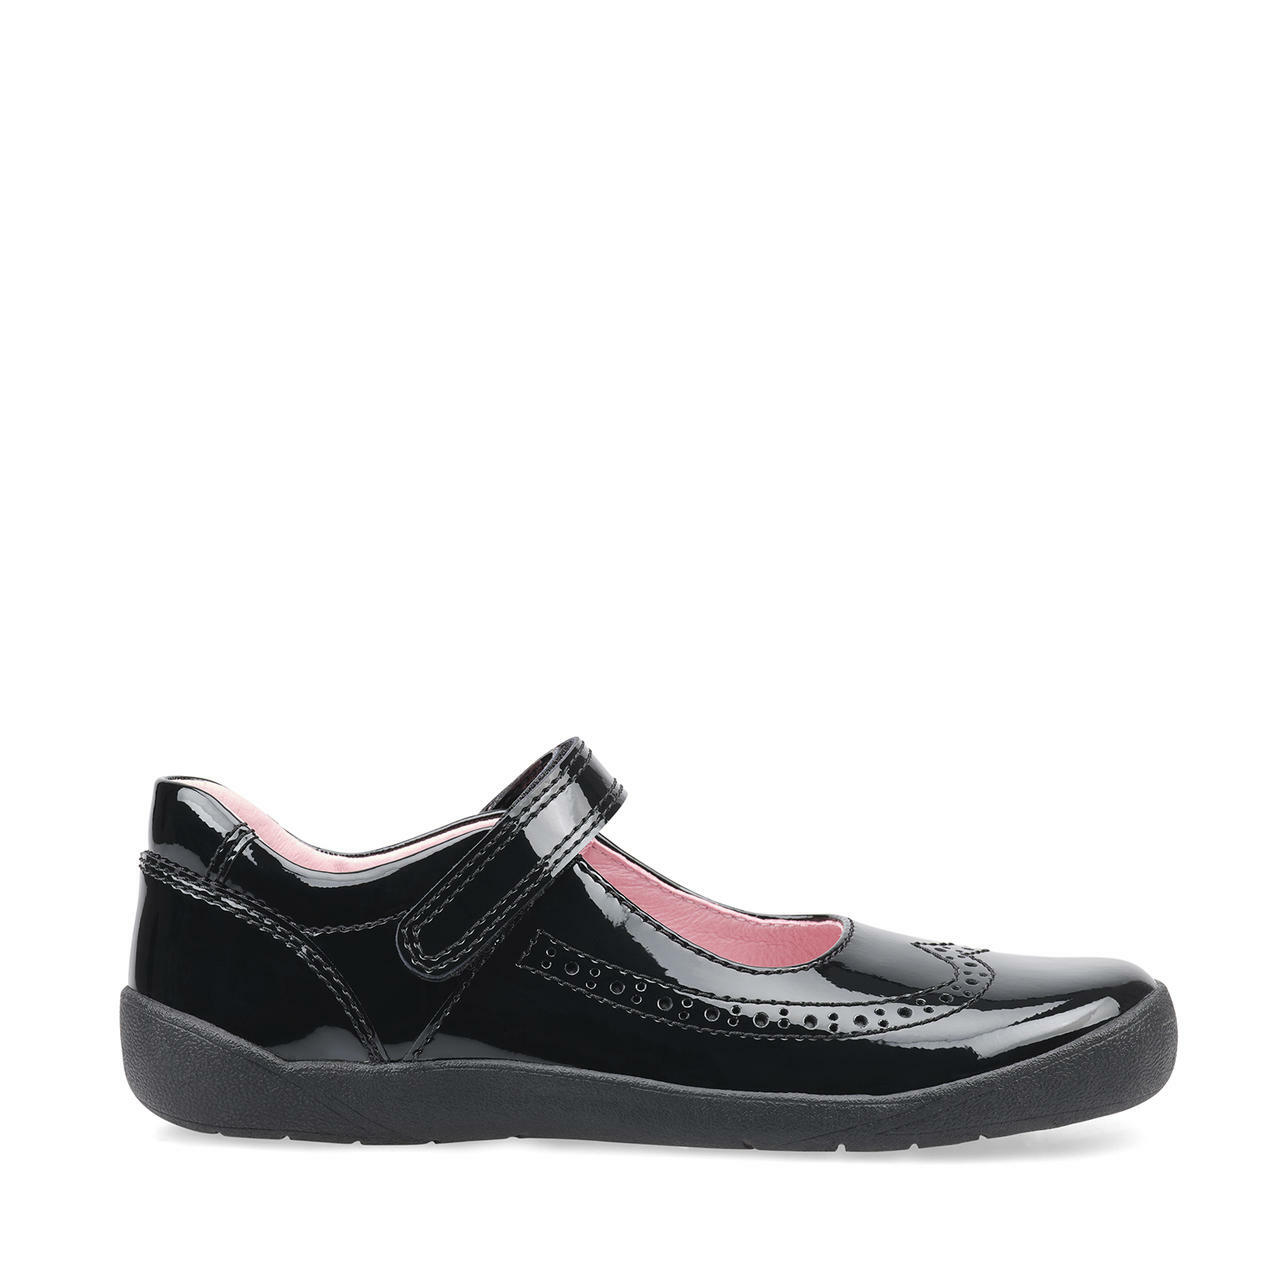 A girls Mary Jane school shoe by Start Rite, style Spirit, in black patent with velcro fastening. Right side view.